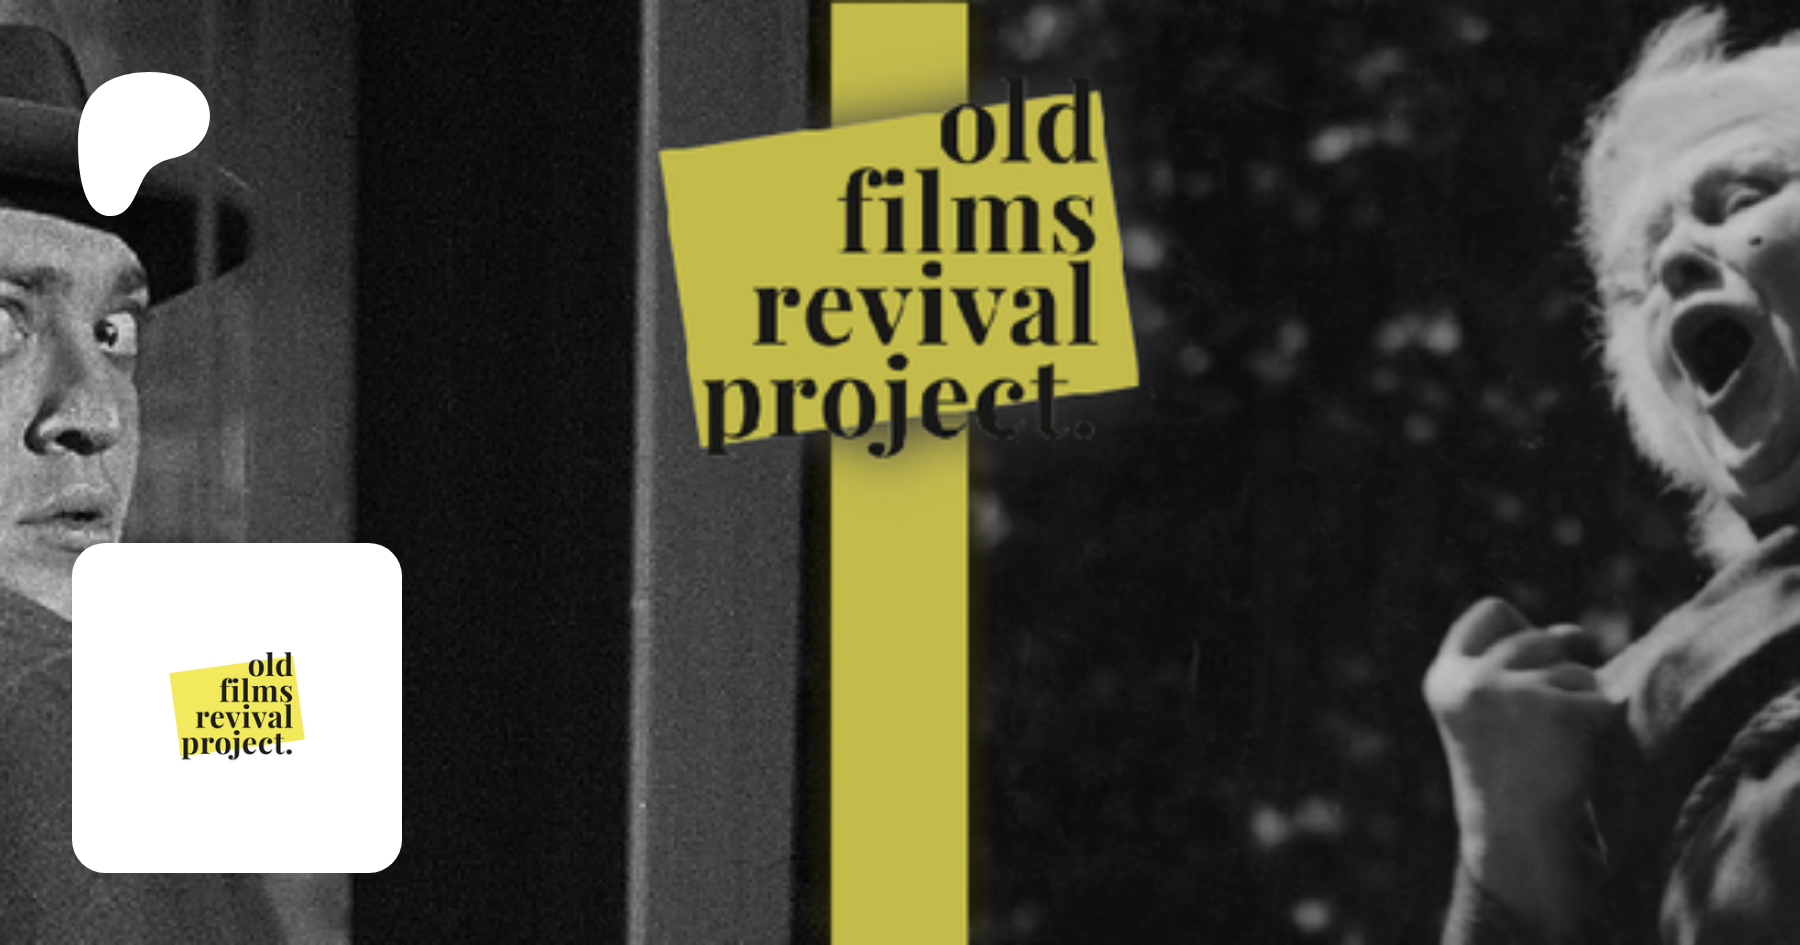 Old Films Revival Project, creating old films and cinema history's stories